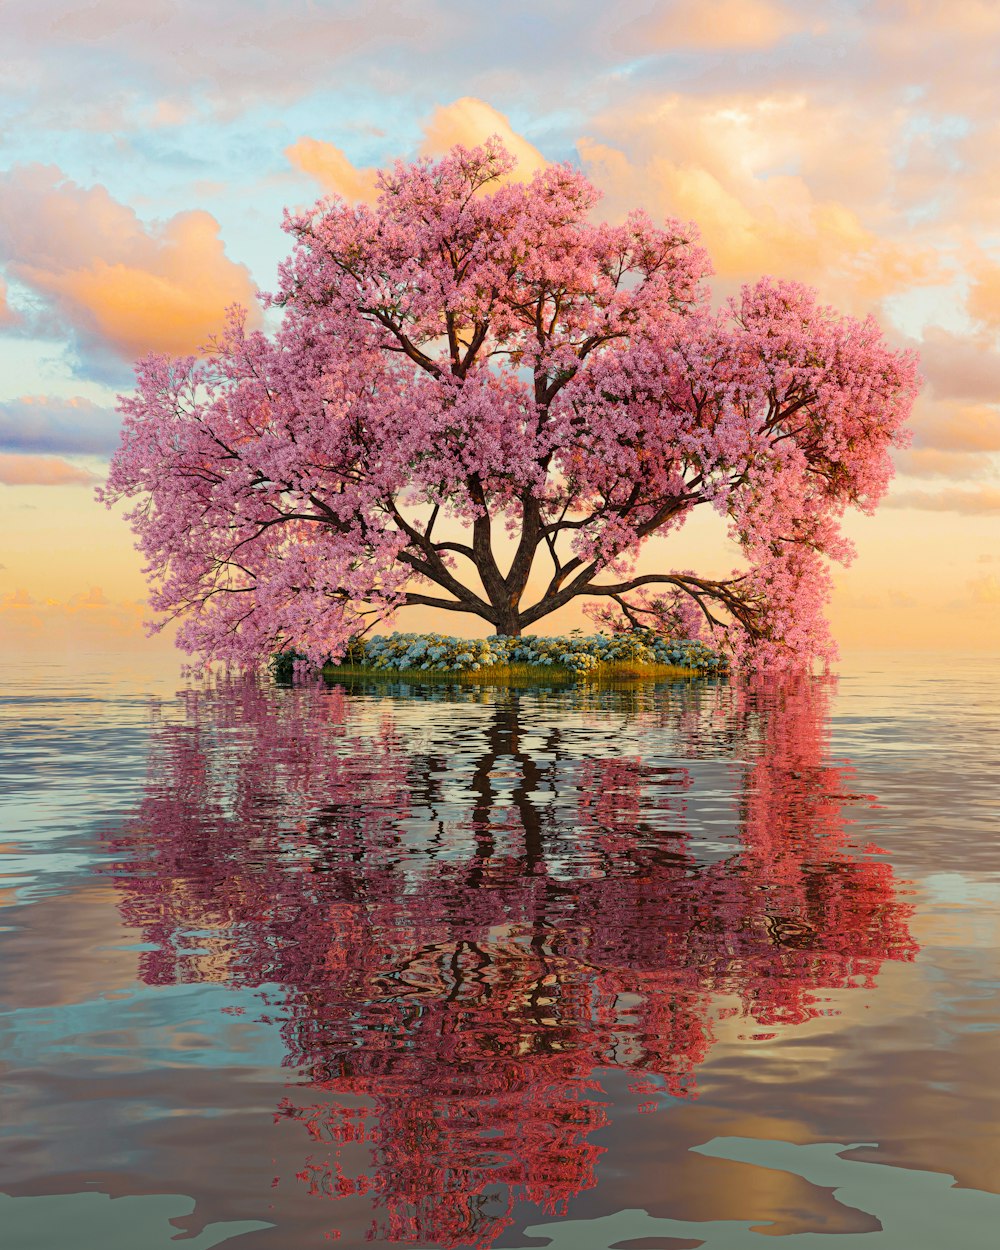 a painting of a tree in the middle of a body of water